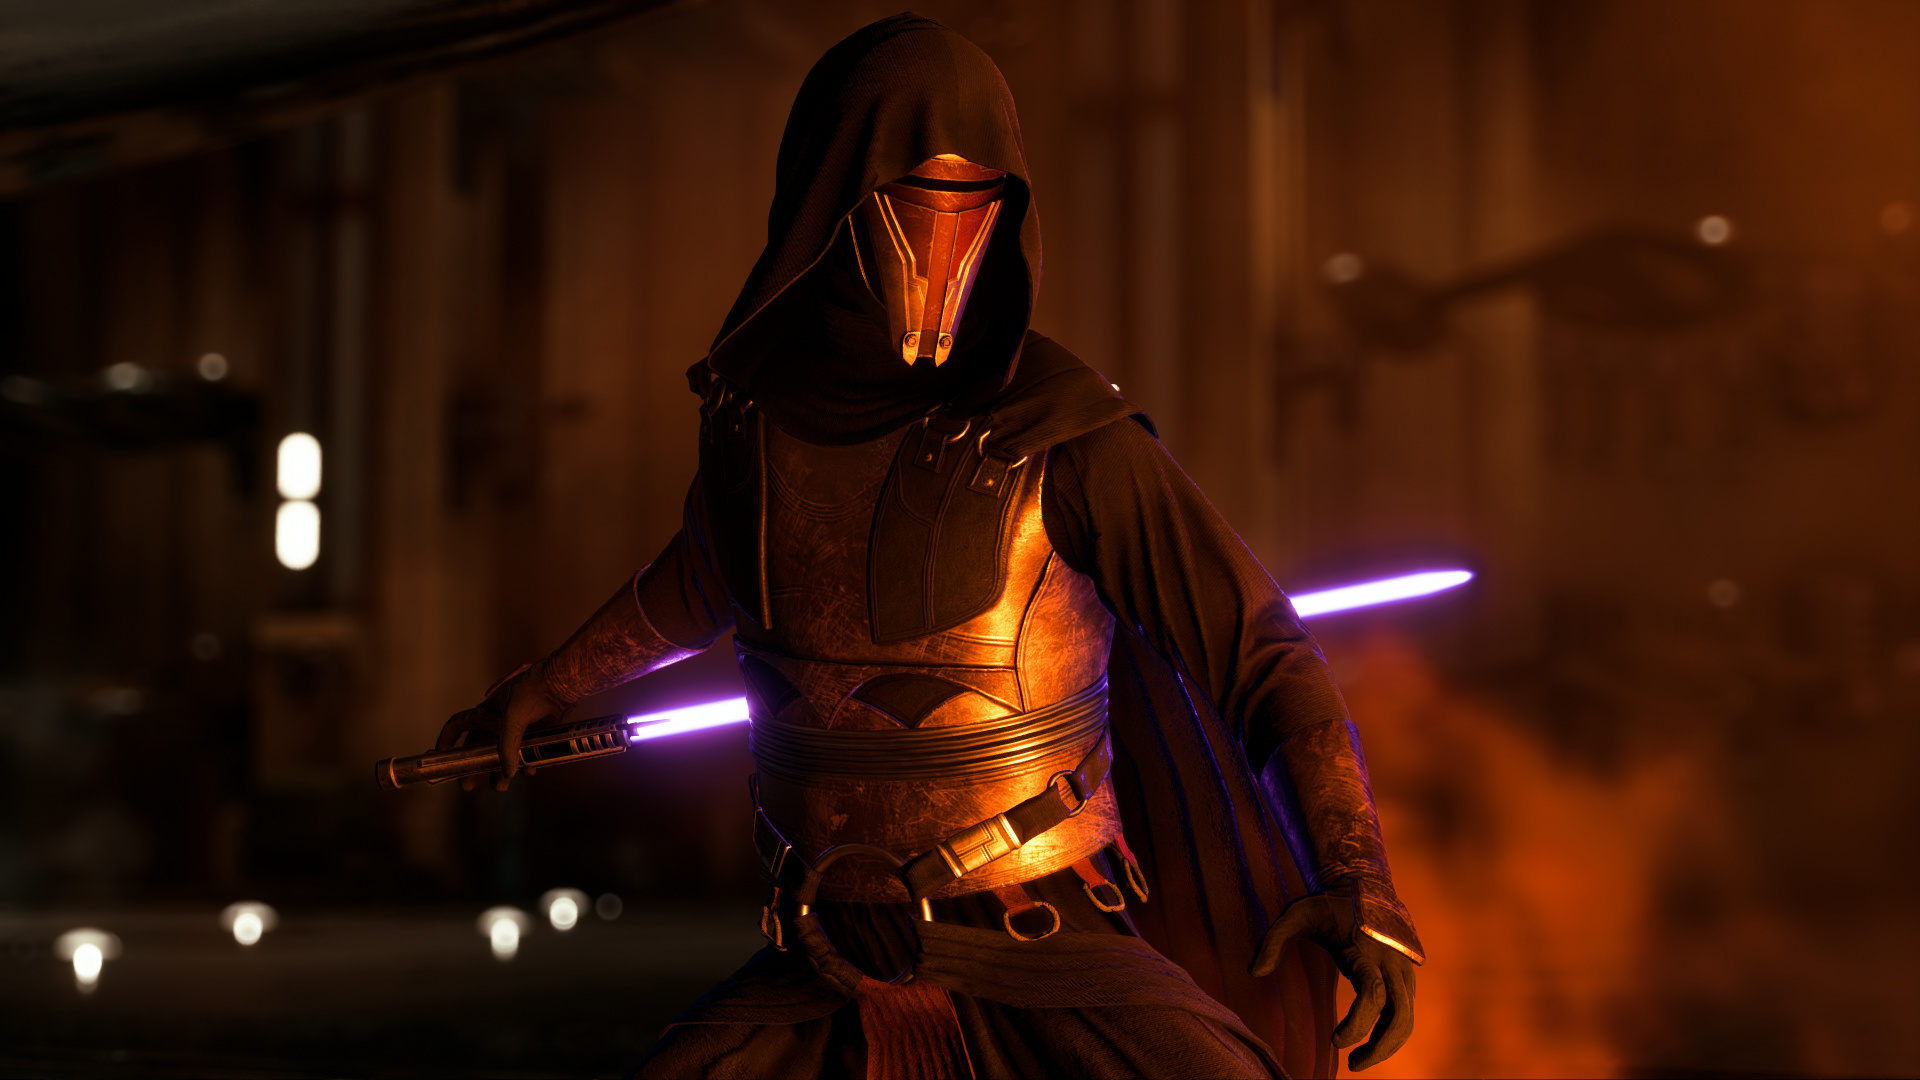 Darth Revan: Brought a fallen Shan back to the light side of the Force, Star Wars: Battlefront II (2017). 1920x1080 Full HD Background.